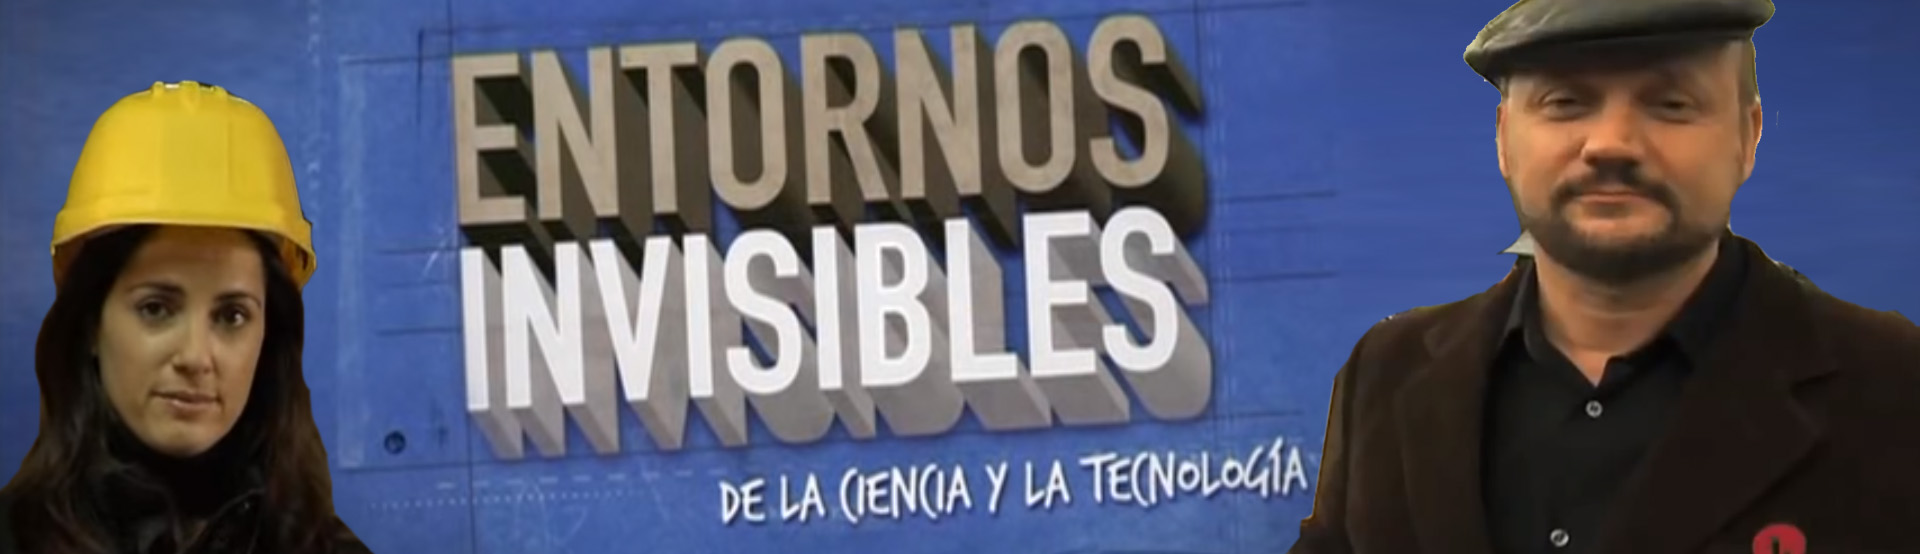 Invisible Science and Technology Surrounding (Spanish)